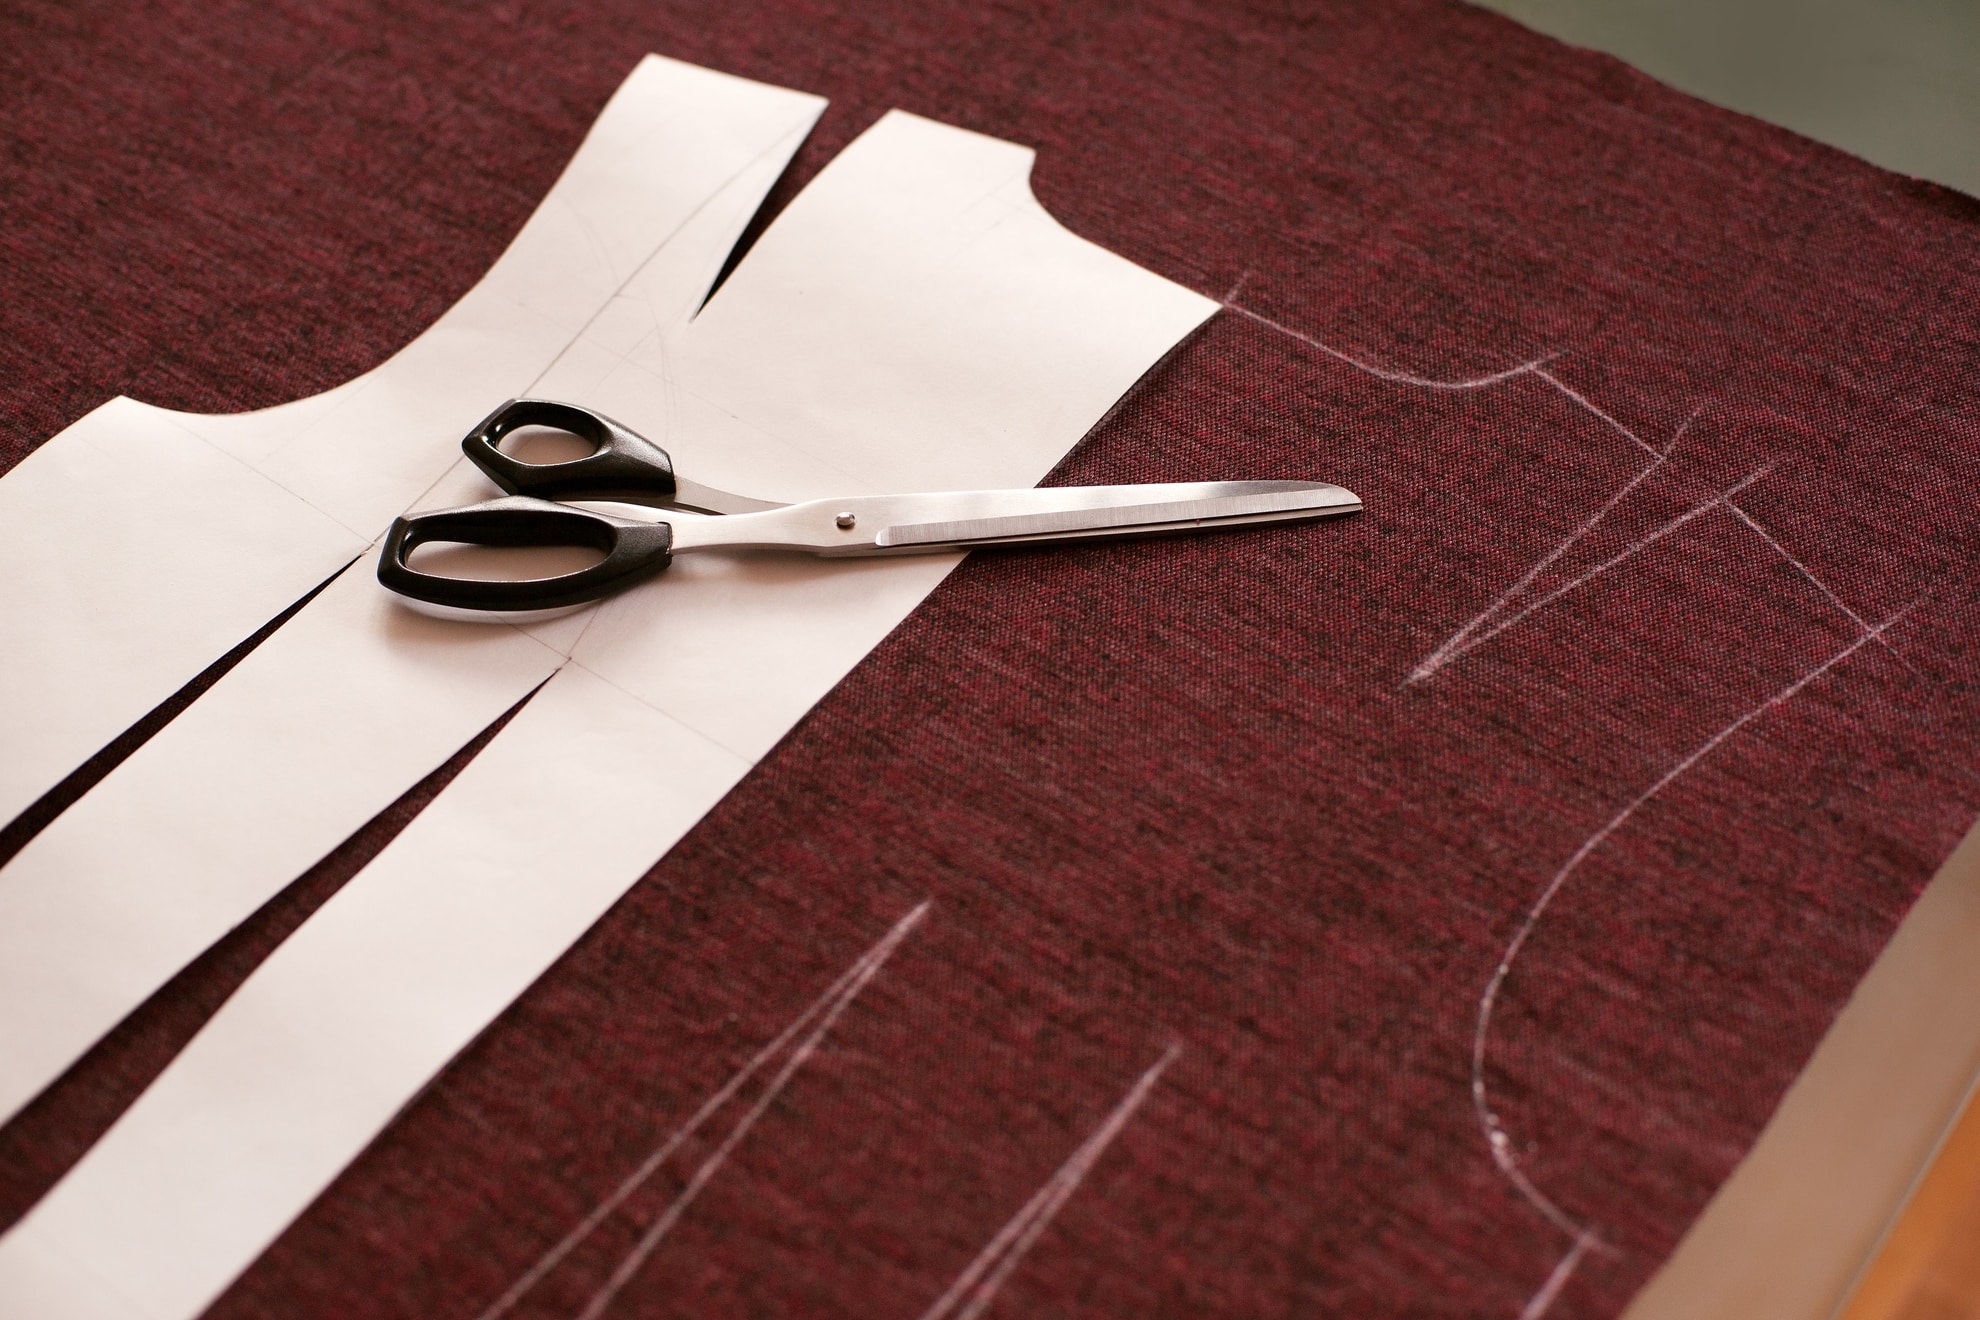 Cutting out fabric based on patterns